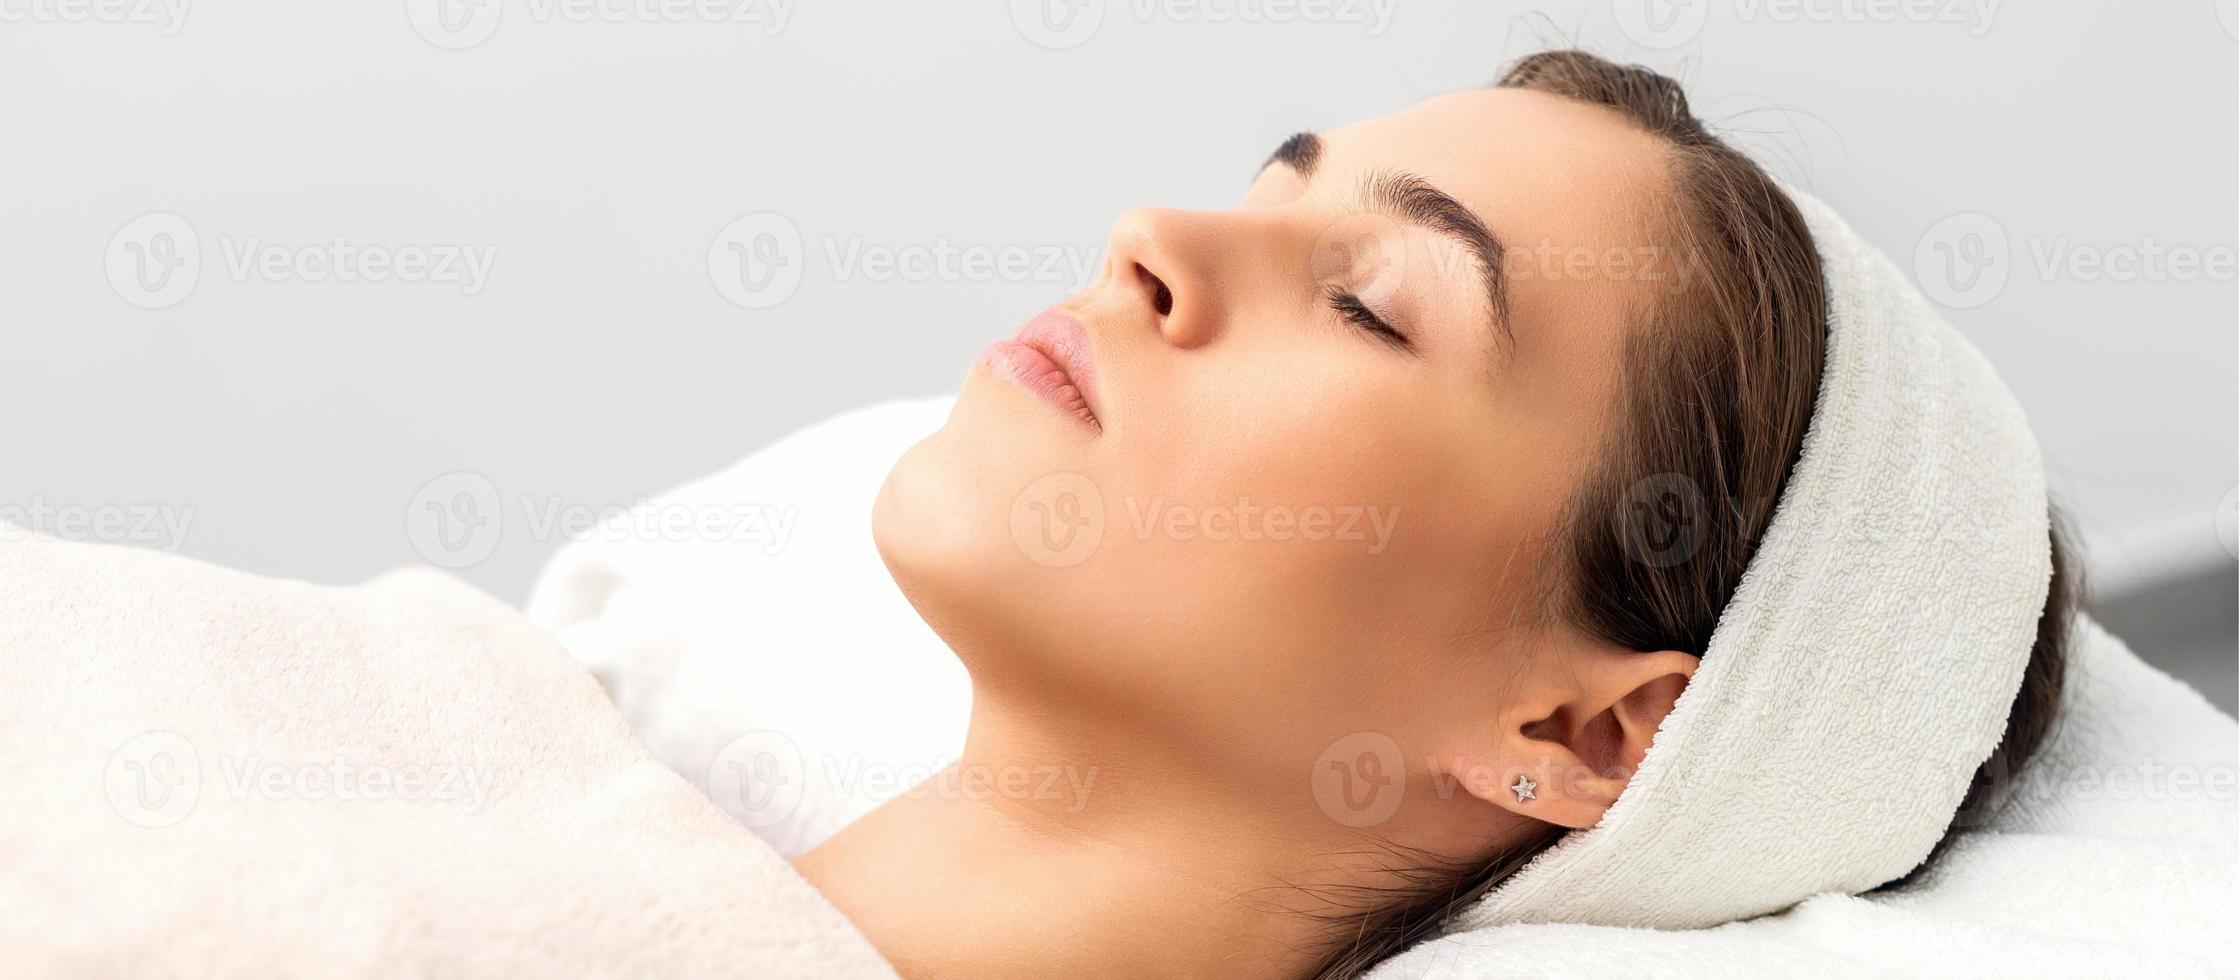 Woman waiting for cosmetic procedure photo